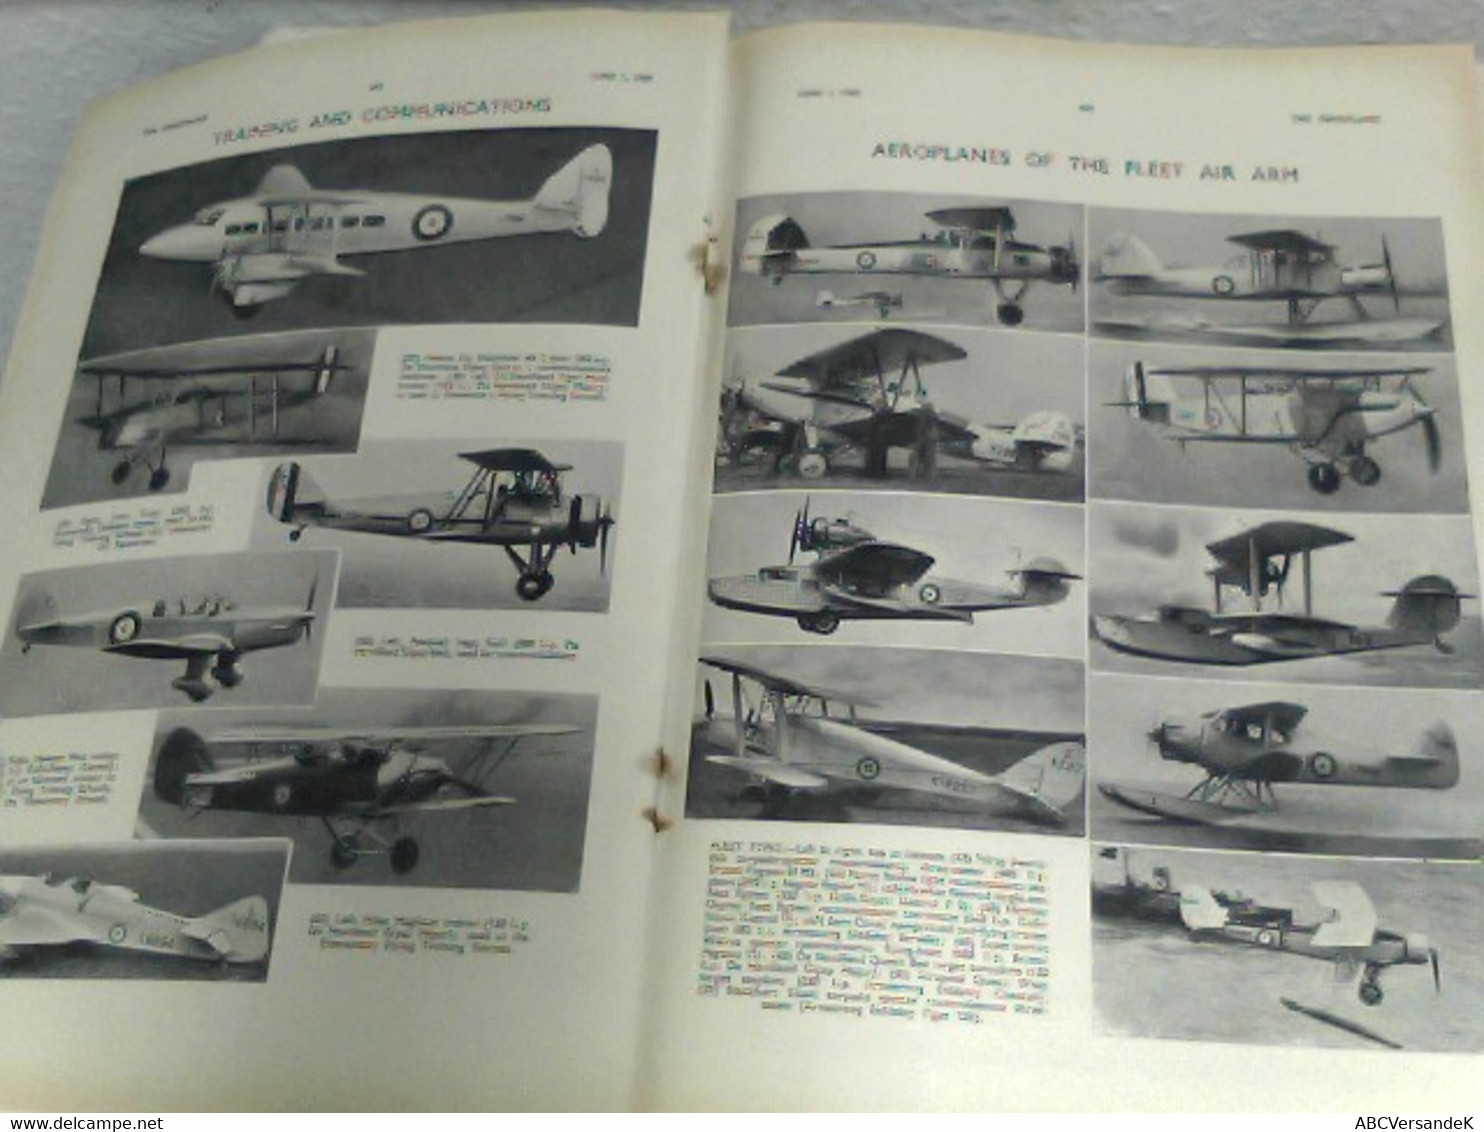 The Aeroplane - June 1, 1938, Vol. LIV, No. 1410 - Titanine Aircraft Finishes. The Latest Air Ministry Specifi - Transport